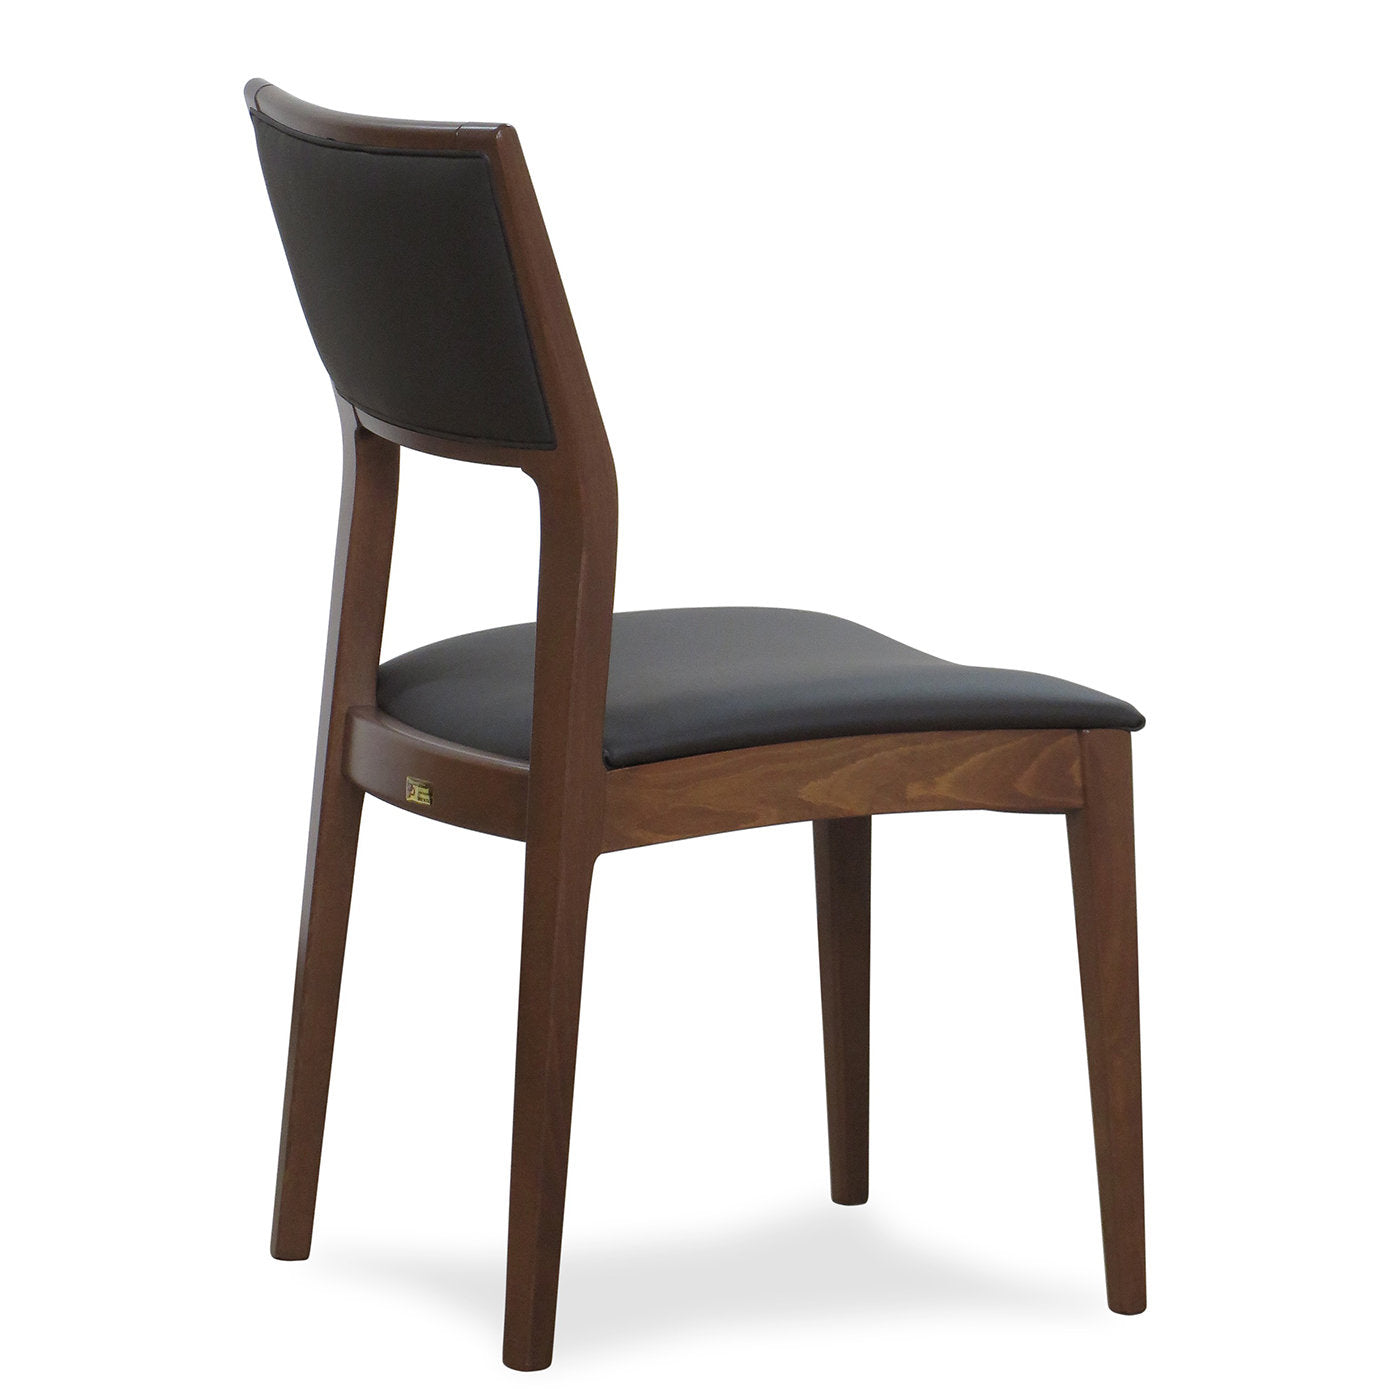 Dom-5 Set of 2 Chairs - Alternative view 2